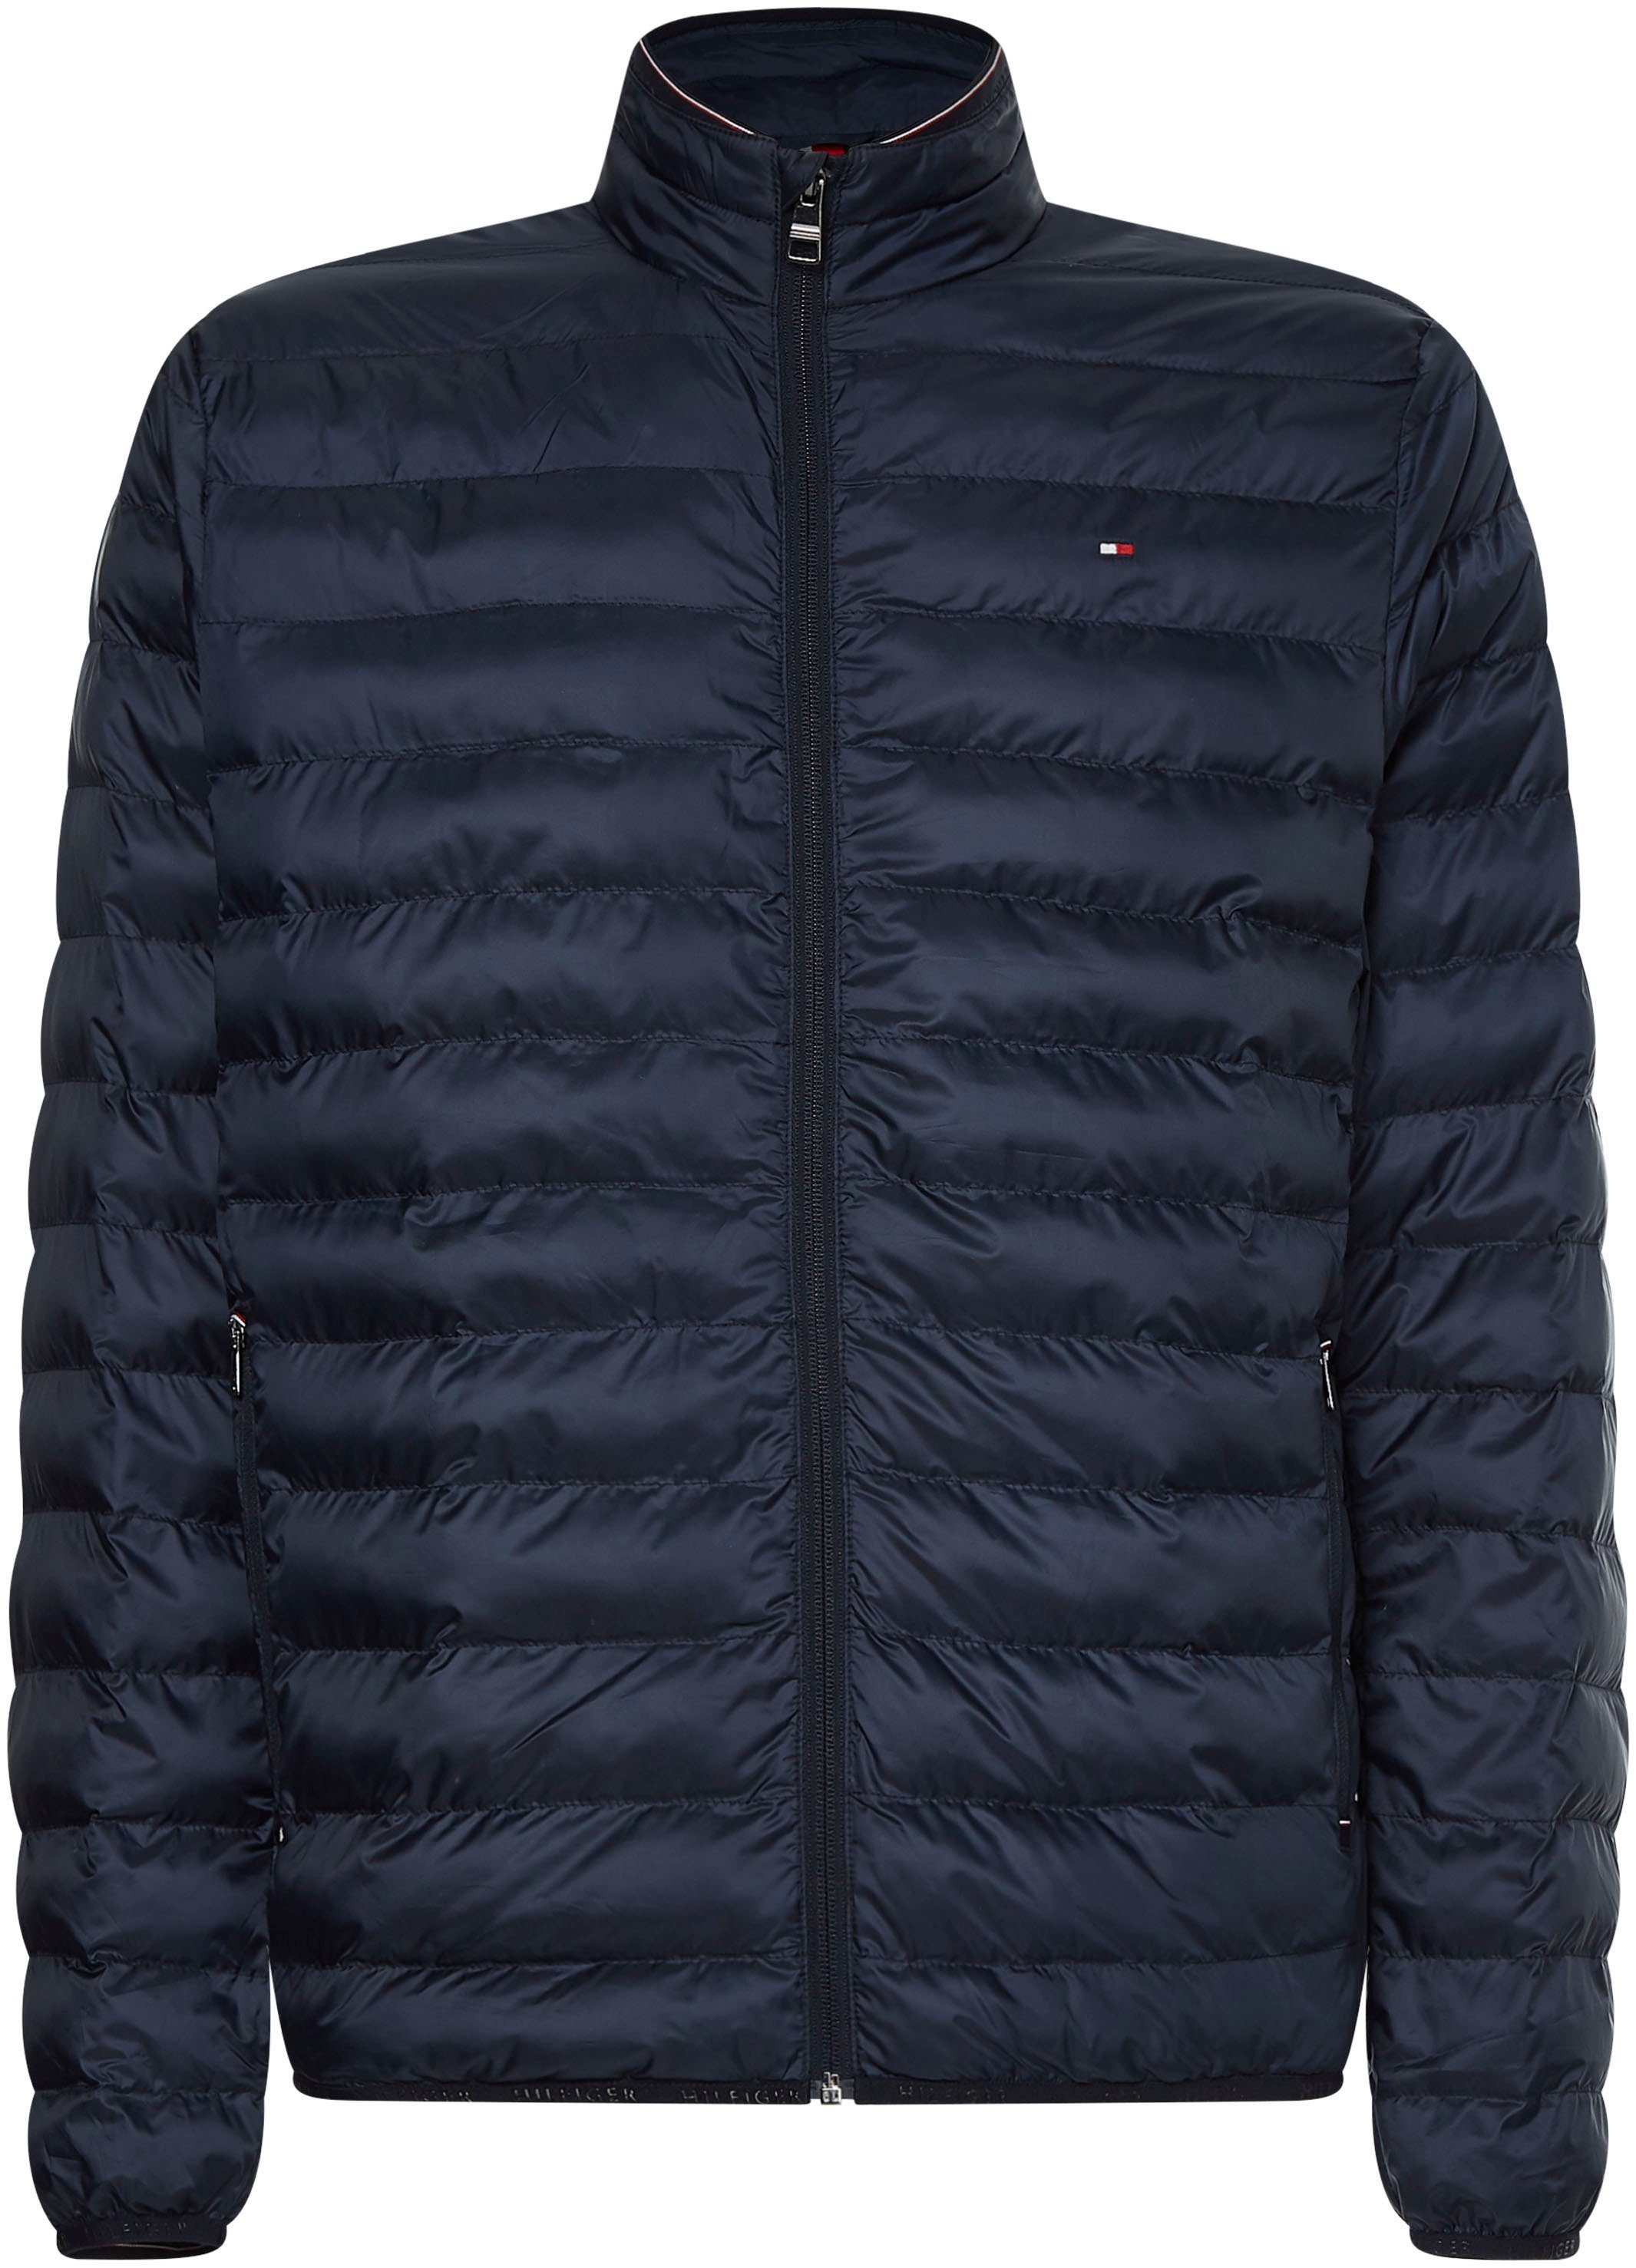 Steppjacke Tommy Hilfiger PACKABLE JACKET sky RECYCLED desert CORE